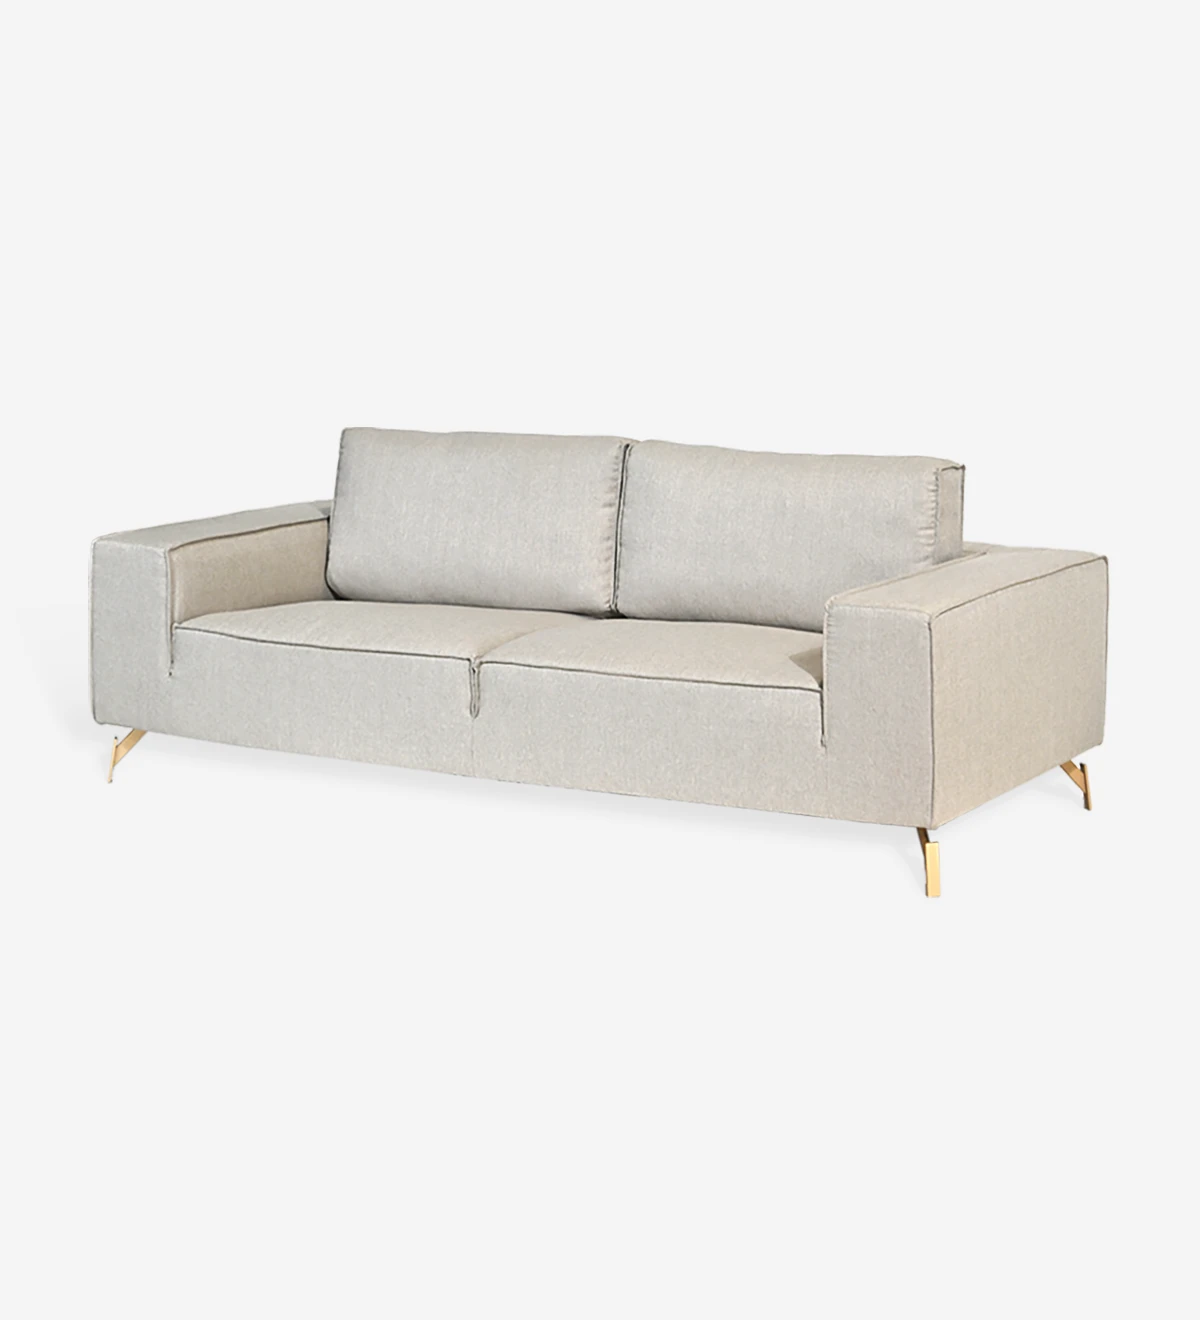 3 seater, fabric upholstered, with gold lacquered metal feet.